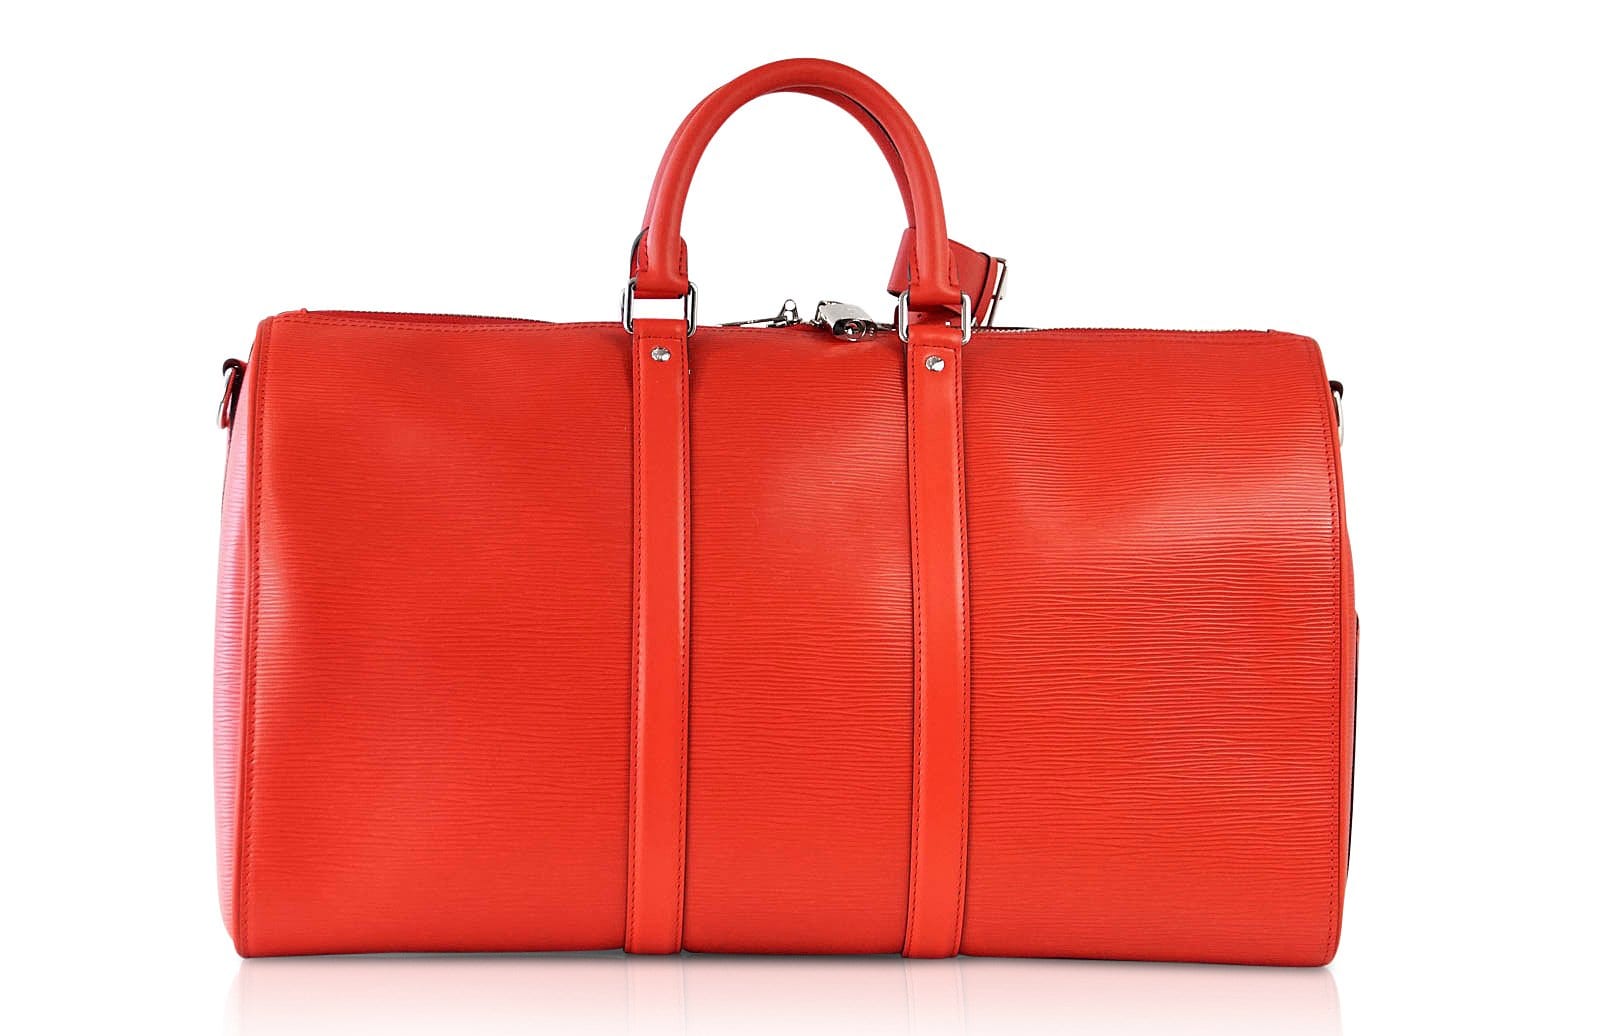 Louis Vuitton X Supreme Red Epi Keepall Bandouliere Duffle Bag 45 - mightychic